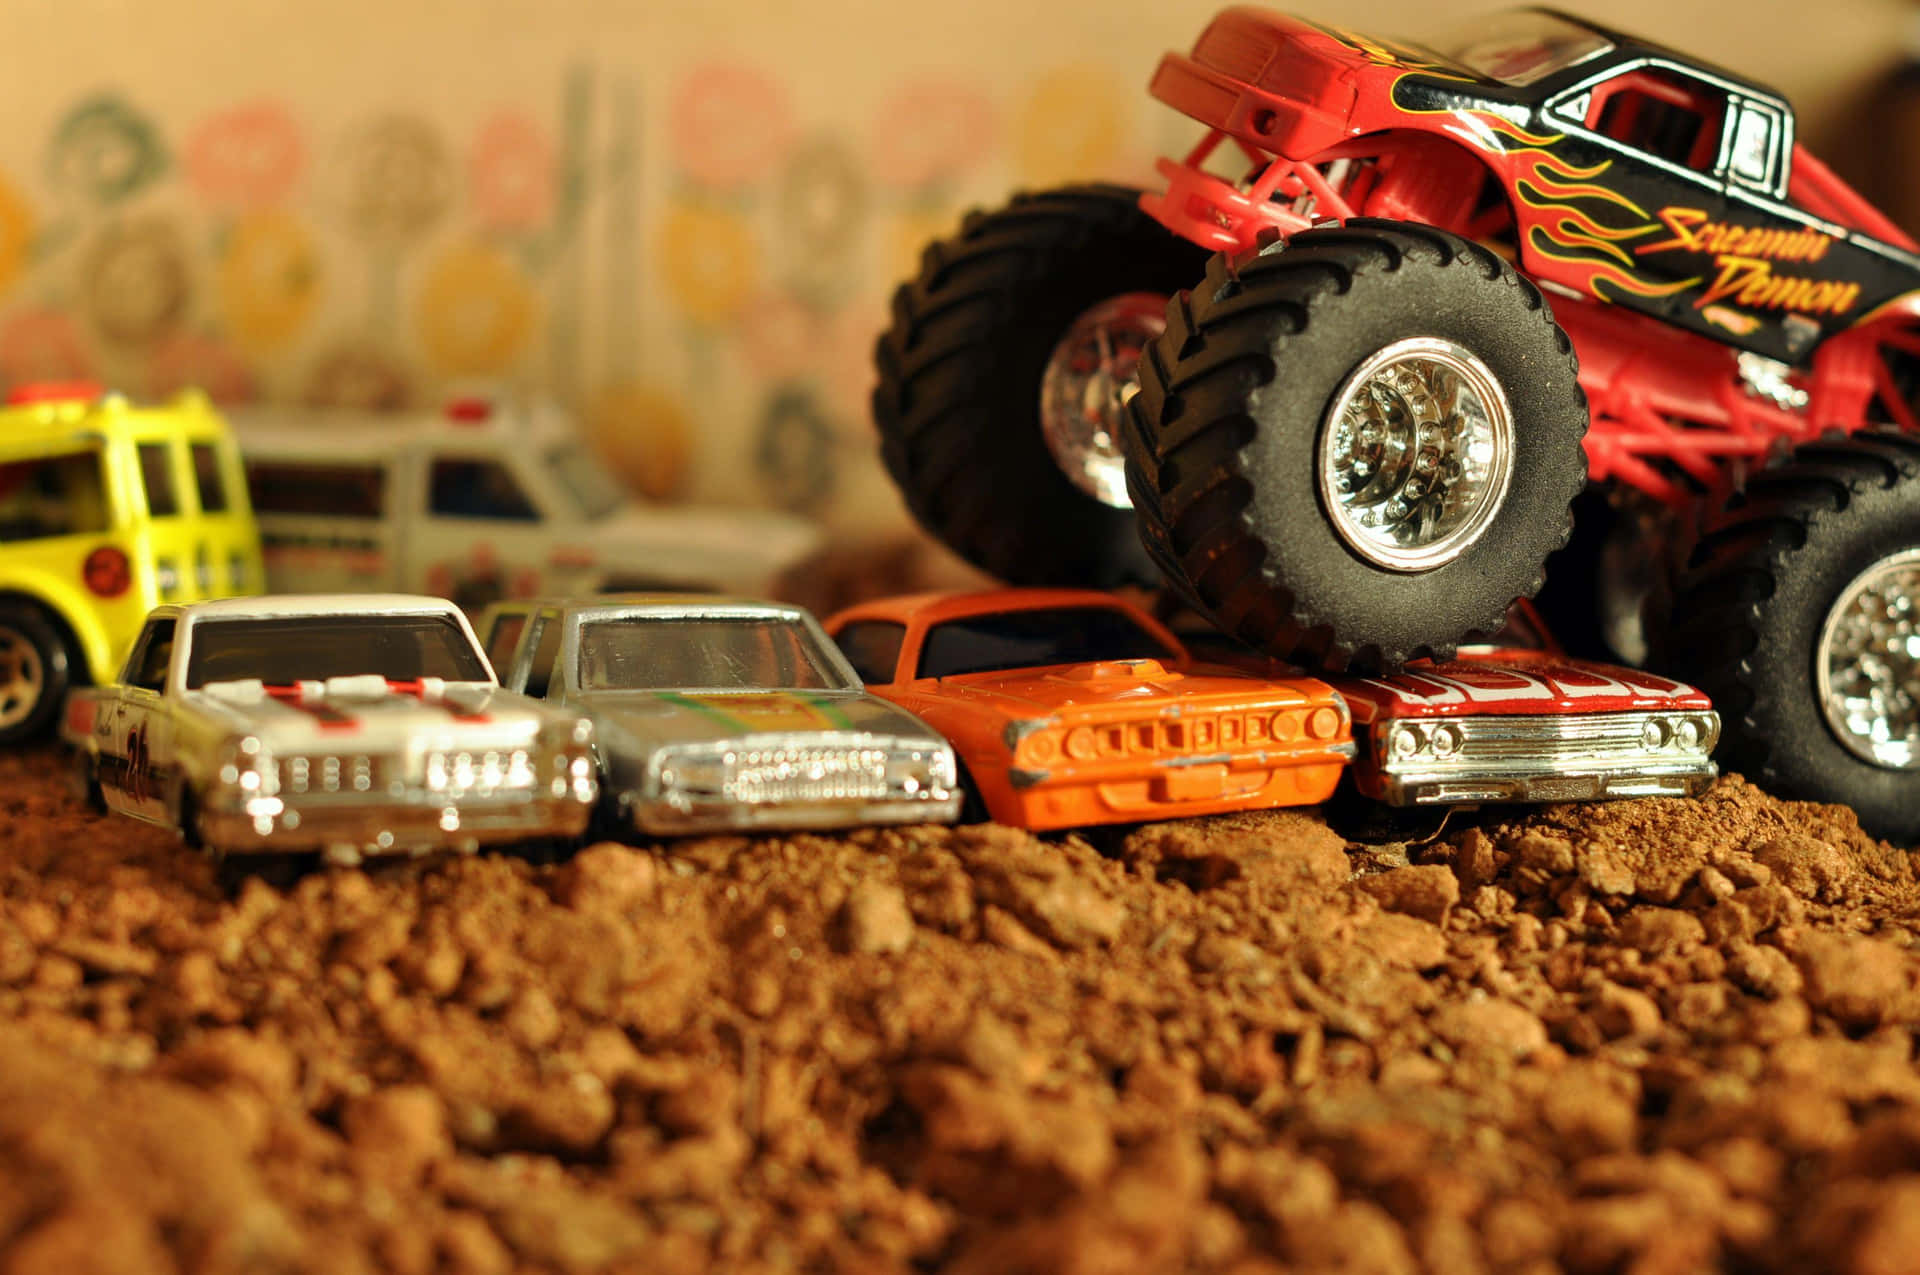 Watch in amazement as this monster truck obliterates obstacles with ease!